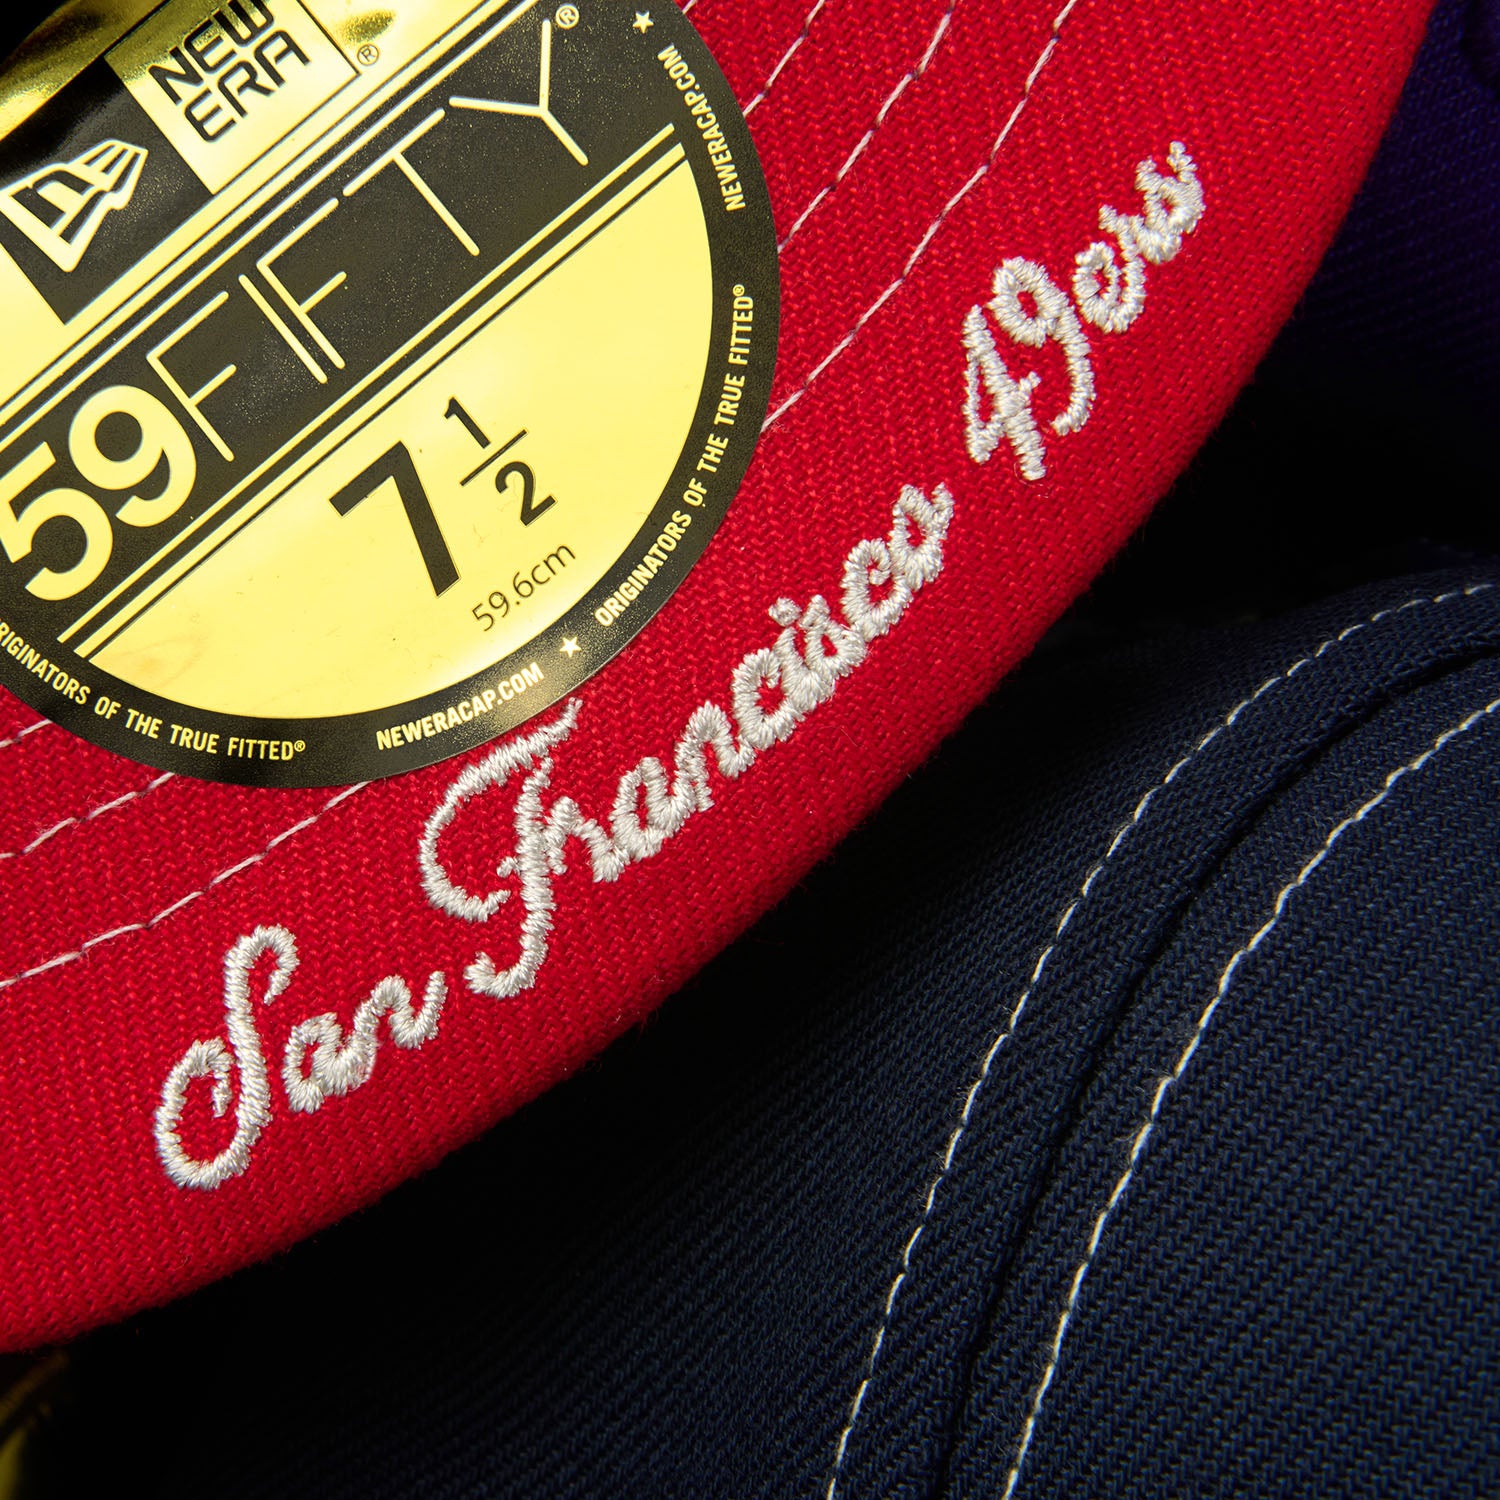 Shop headwear and apparel from the New Era Sport Classics Collection